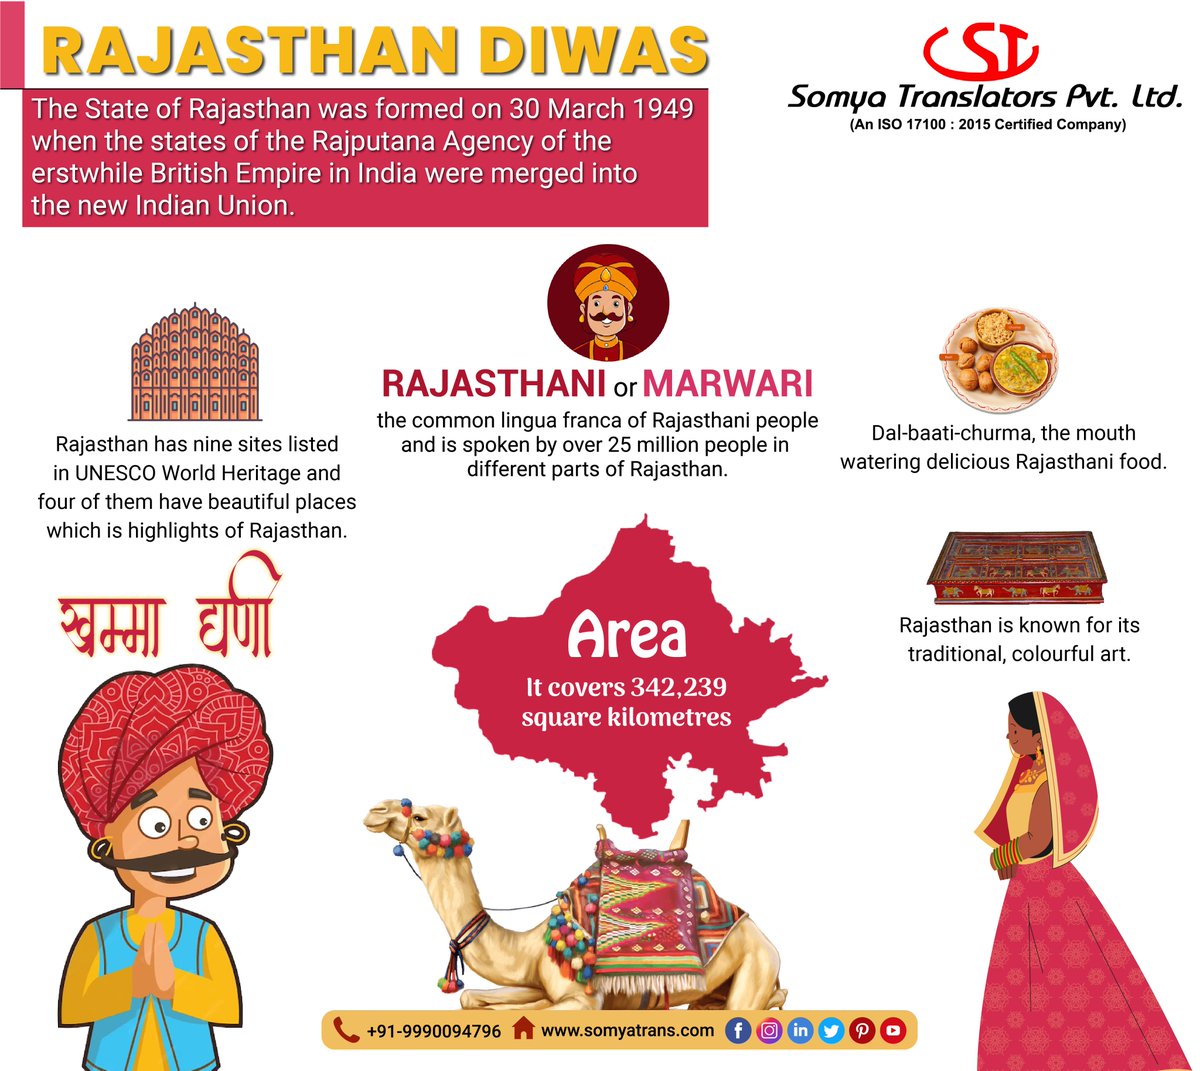 Experience the warmth of 'Khamma Ghanni' as we celebrate the rich tapestry of Rajasthani culture, savor the tantalizing flavors of its cuisine, immerse in its diverse languages, and discover the awe-inspiring beauty of its iconic destinations.

#RajasthanDiwas #ExploreRajasthan